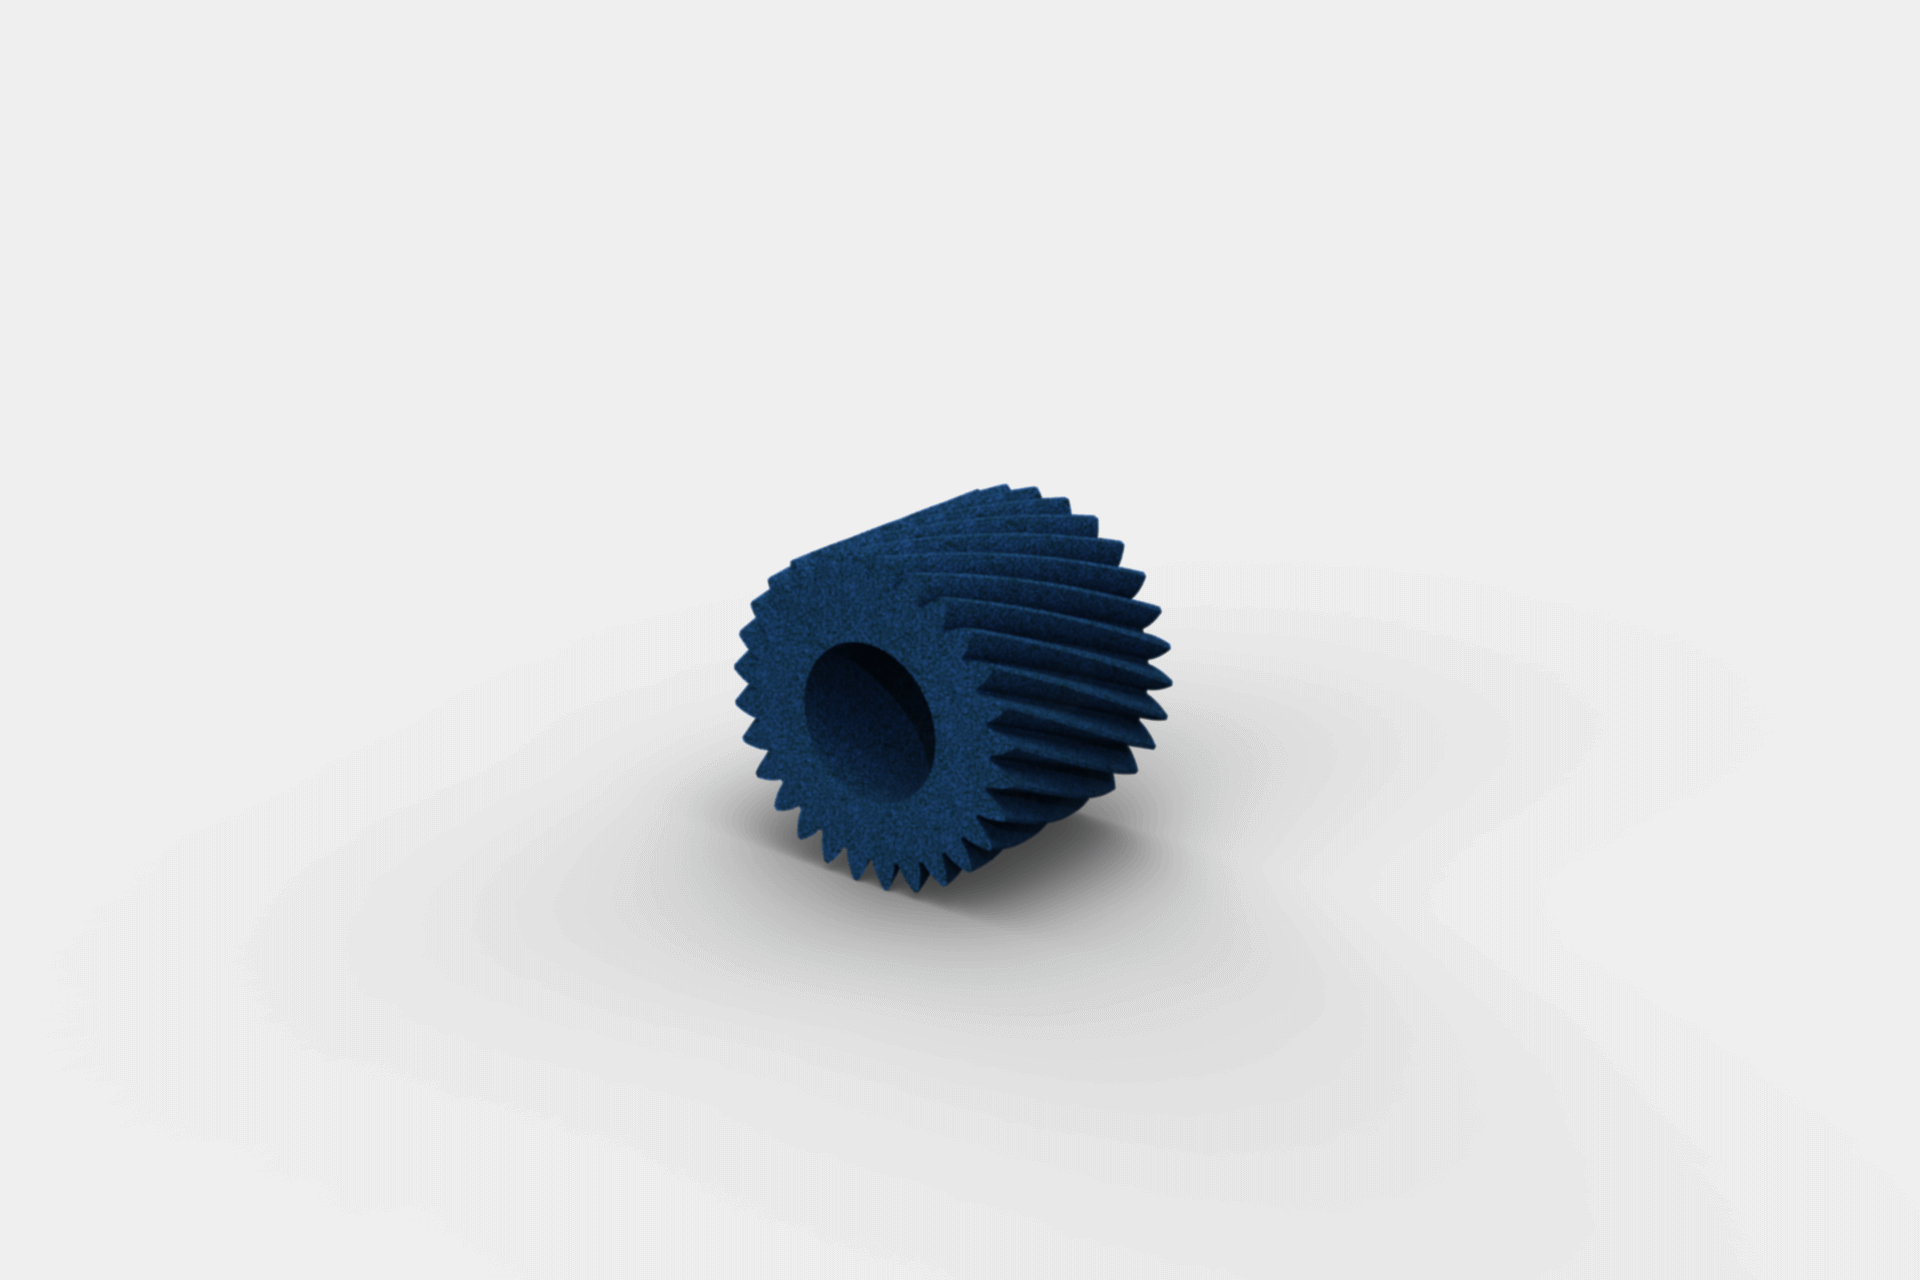 Perfect finish for internal gears